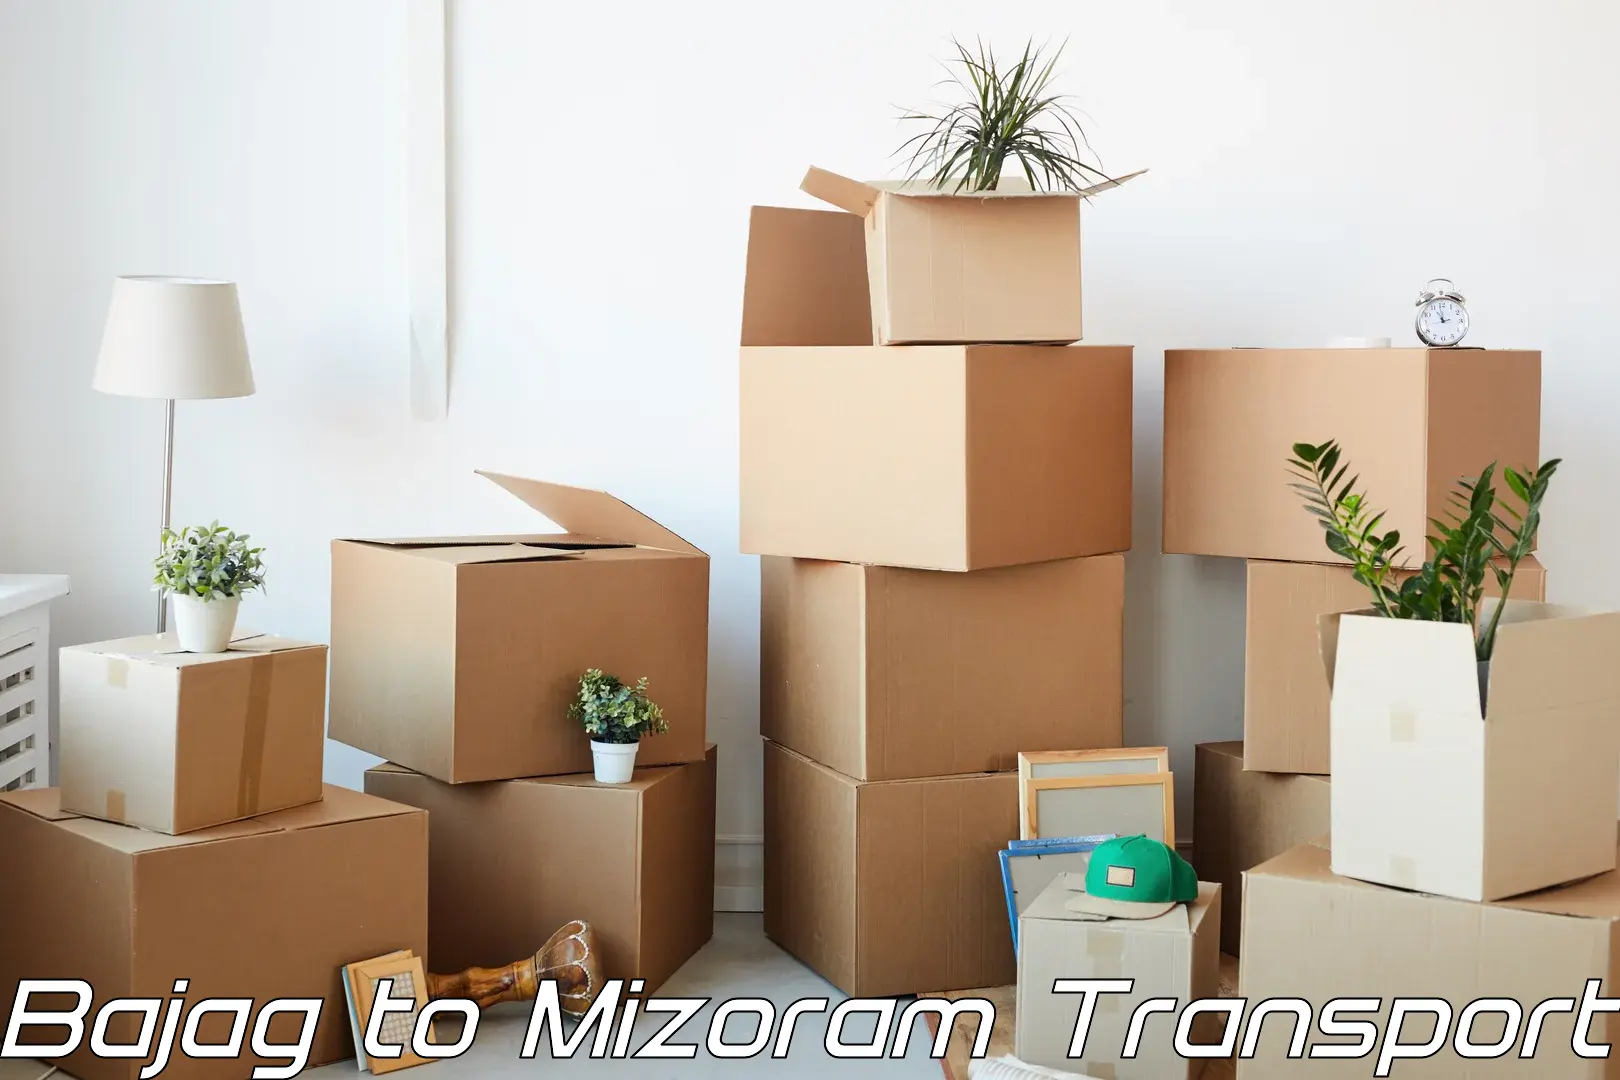 Container transportation services Bajag to Mizoram